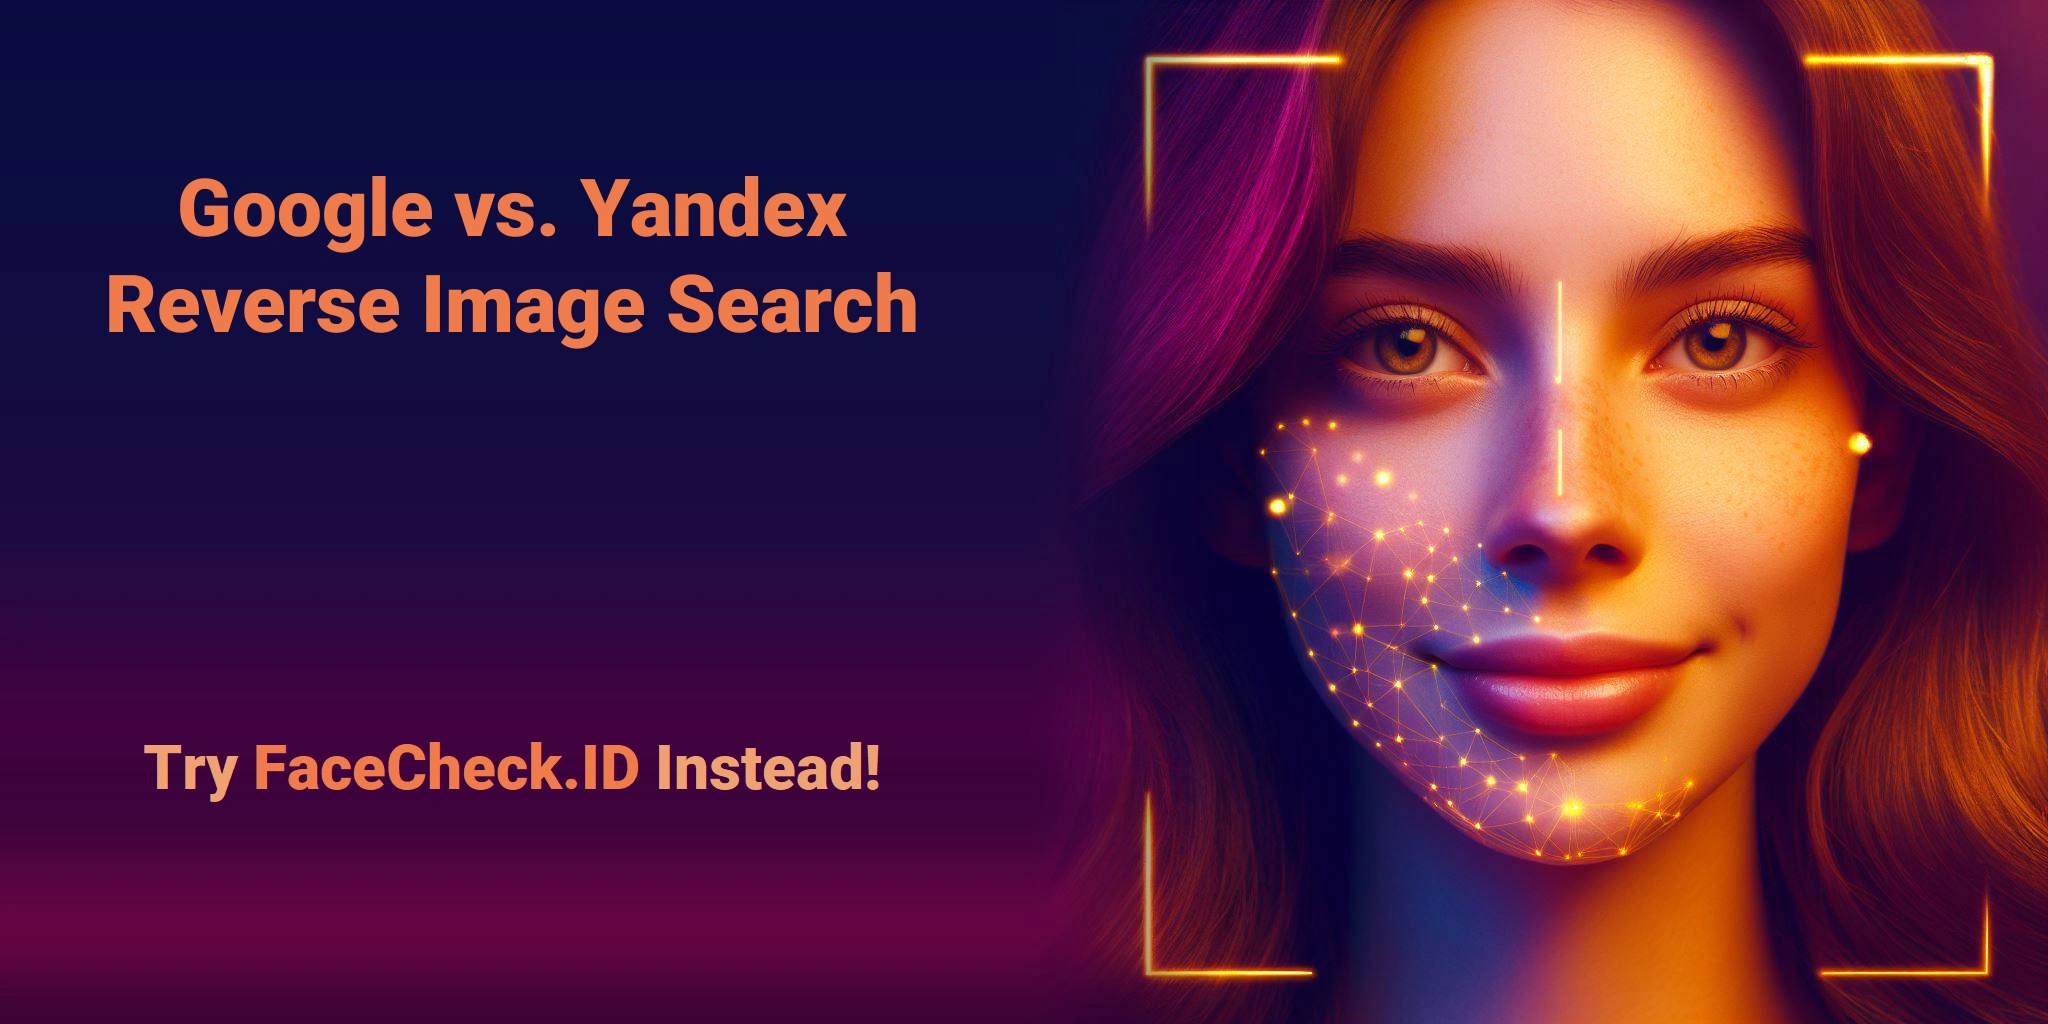 Google vs. Yandex Reverse Image Search Try FaceCheck.ID Instead!